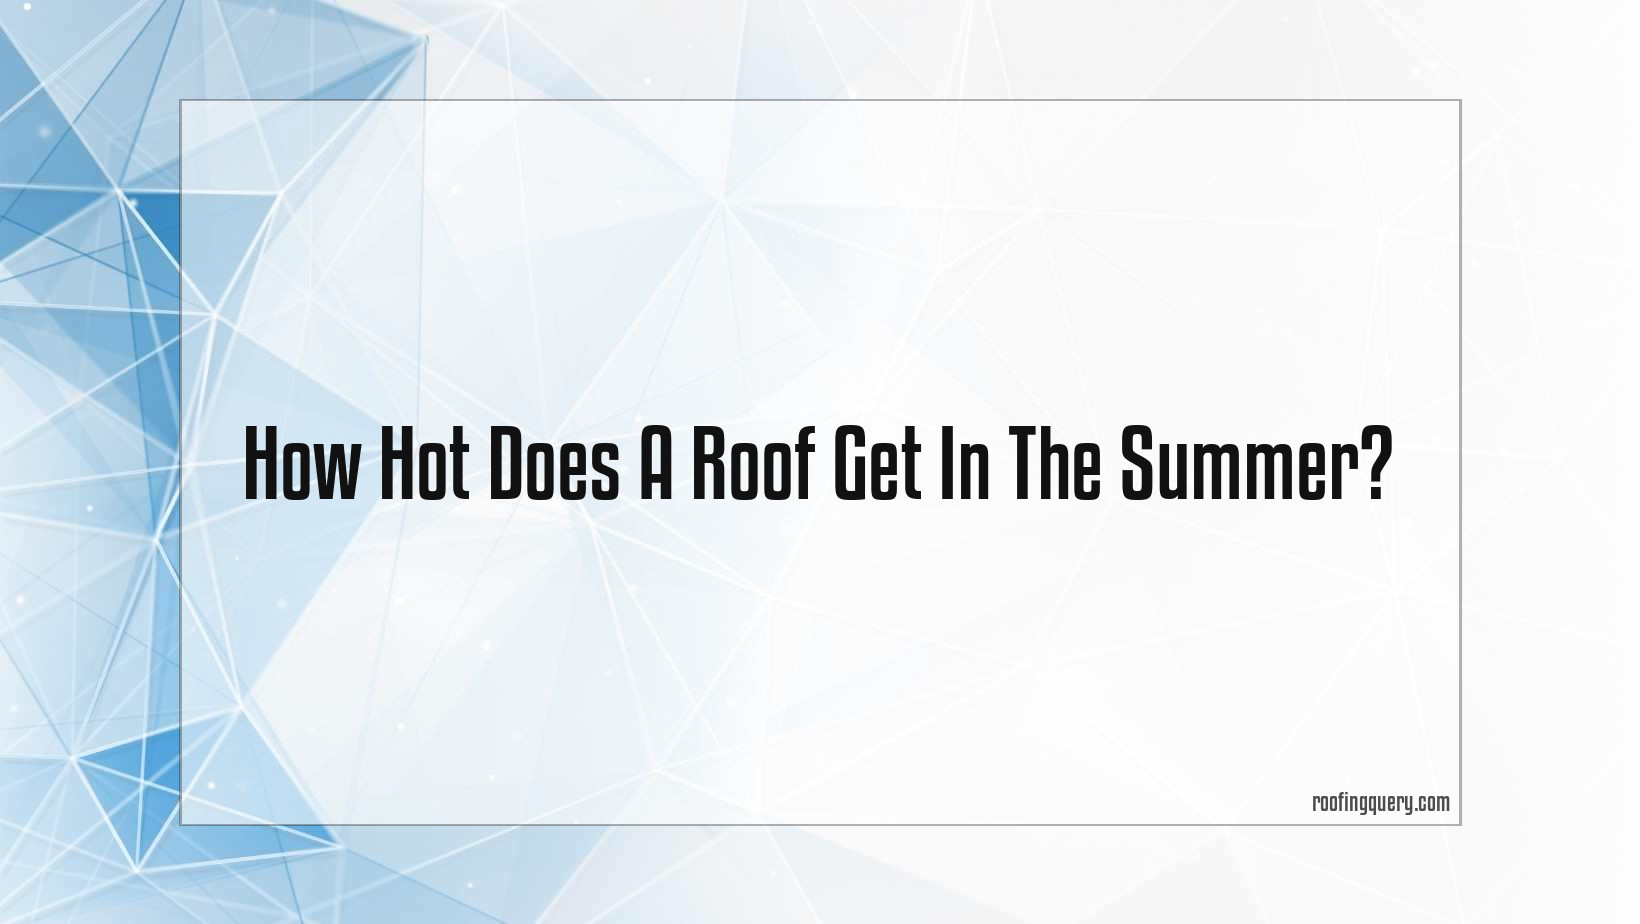 How Hot Does A Roof Get In The Summer?